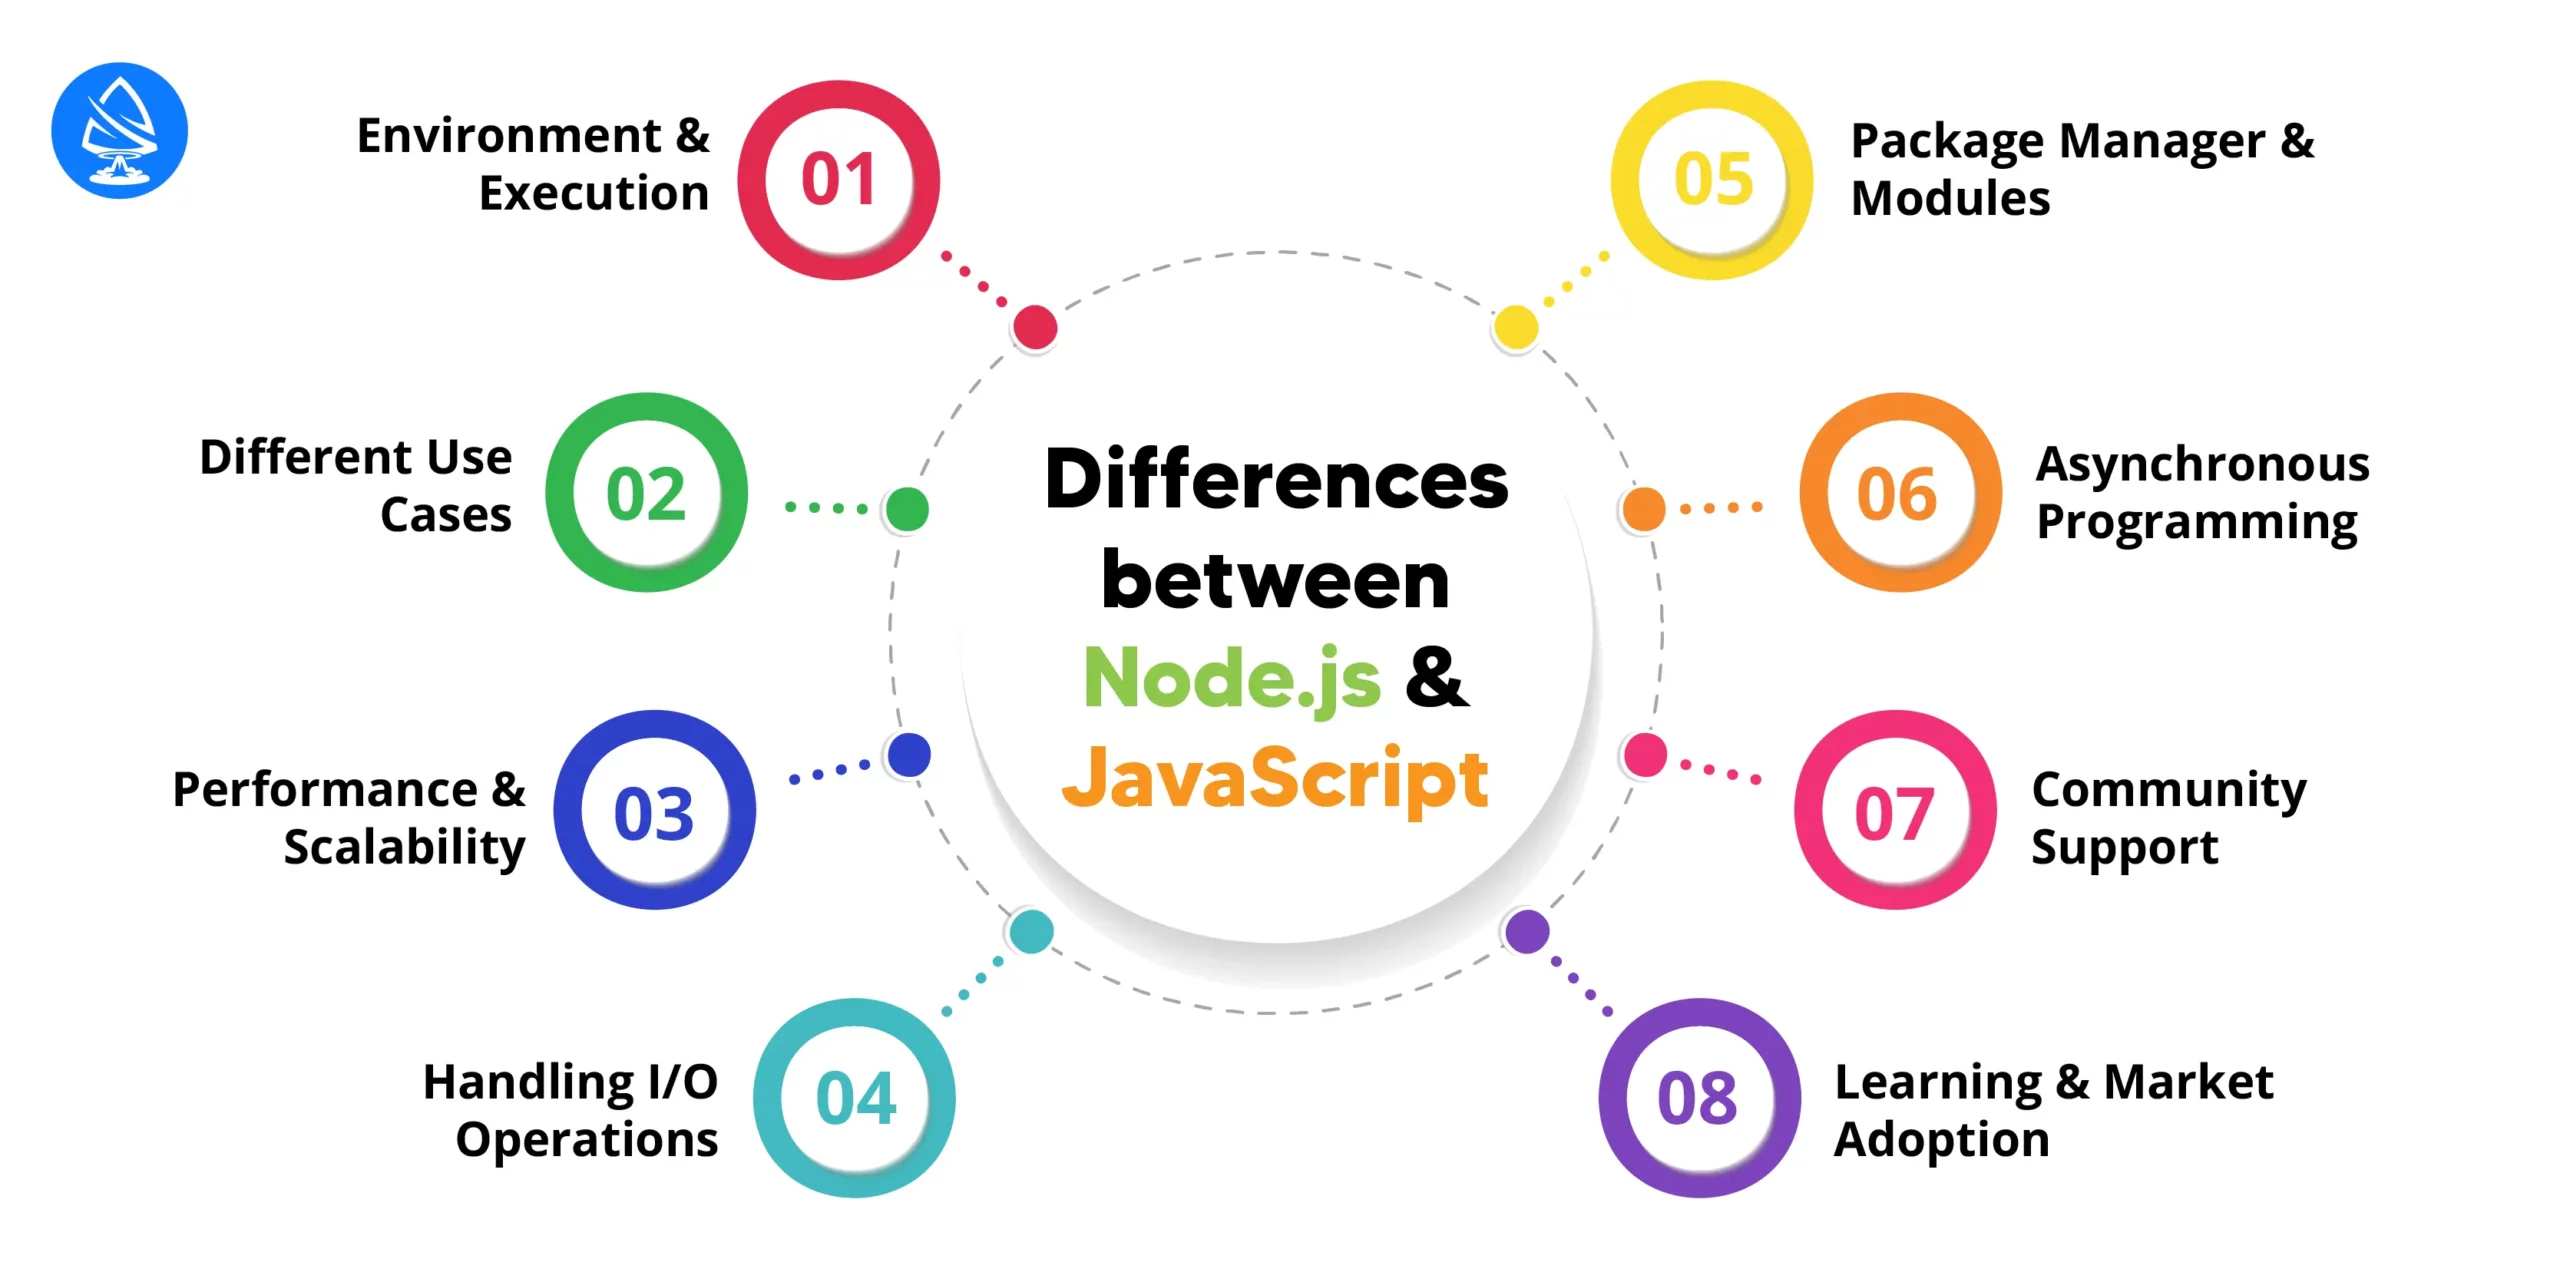 Key Differences between Node.js and JavaScript